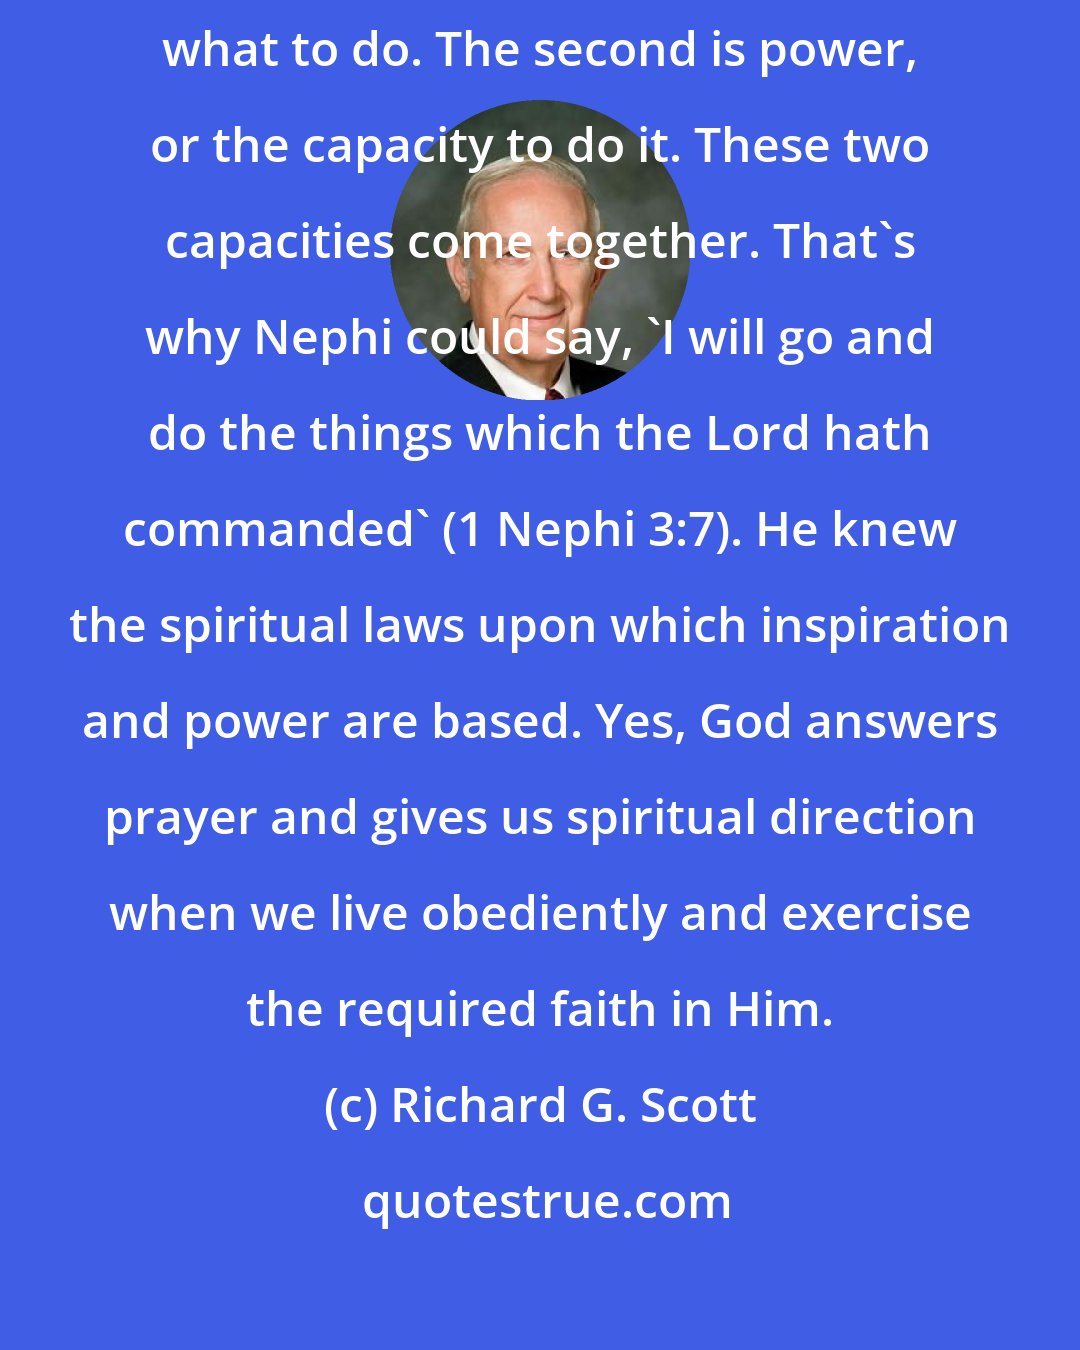 Richard G. Scott: Spirituality yields two fruits. The first in inspiration to know what to do. The second is power, or the capacity to do it. These two capacities come together. That's why Nephi could say, 'I will go and do the things which the Lord hath commanded' (1 Nephi 3:7). He knew the spiritual laws upon which inspiration and power are based. Yes, God answers prayer and gives us spiritual direction when we live obediently and exercise the required faith in Him.